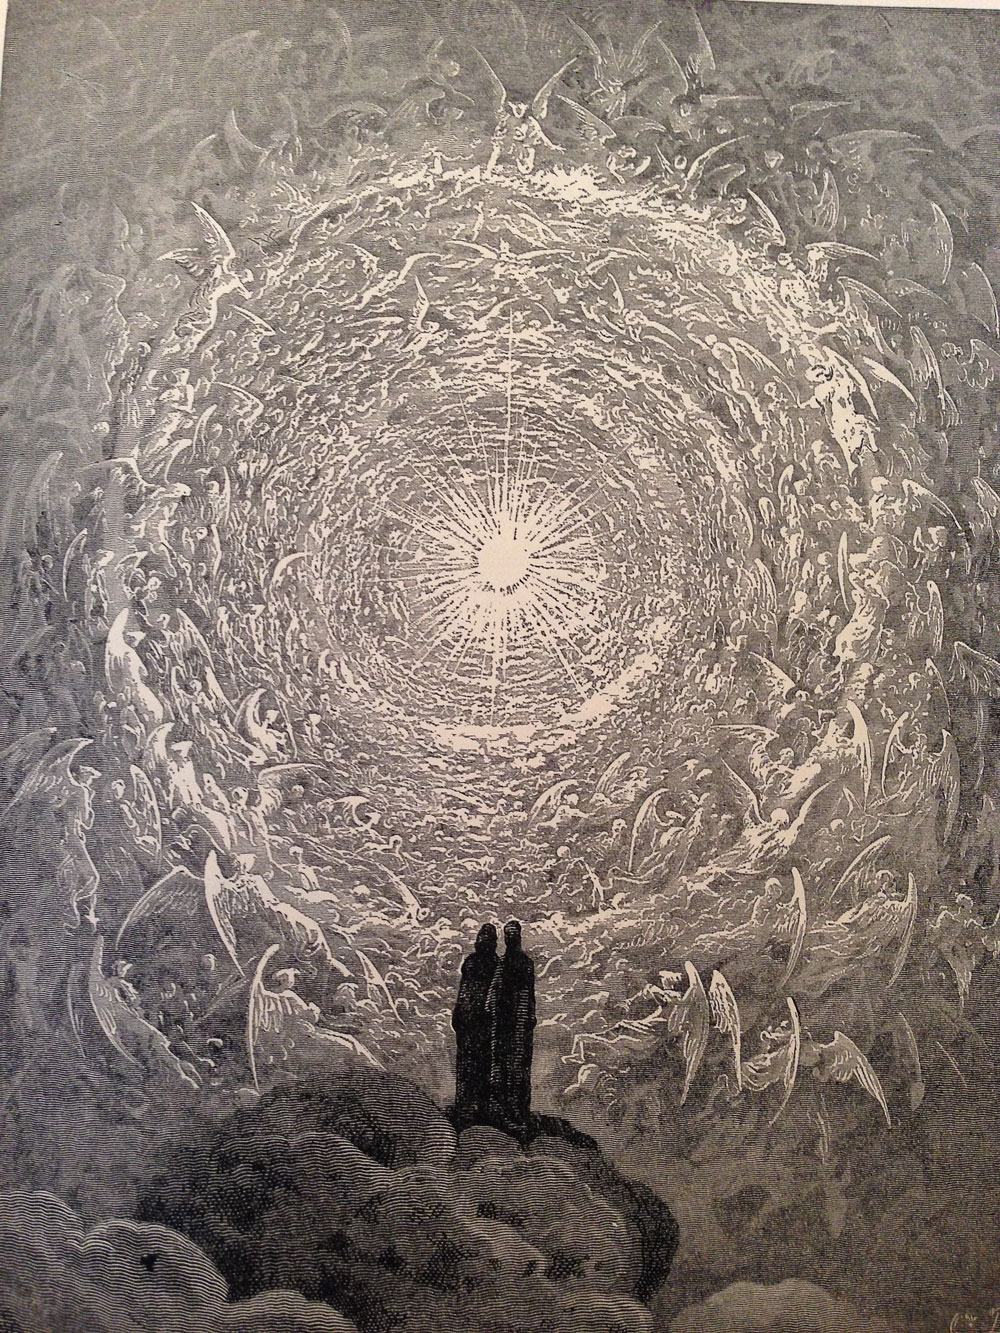 The Holy Trinity of Trading Part III: Risk-Reward Ratio - "Rosa Celeste: Dante and Beatrice gaze upon the highest Heaven, The Empyrean". Illustration by Gustave Doré, 1867.